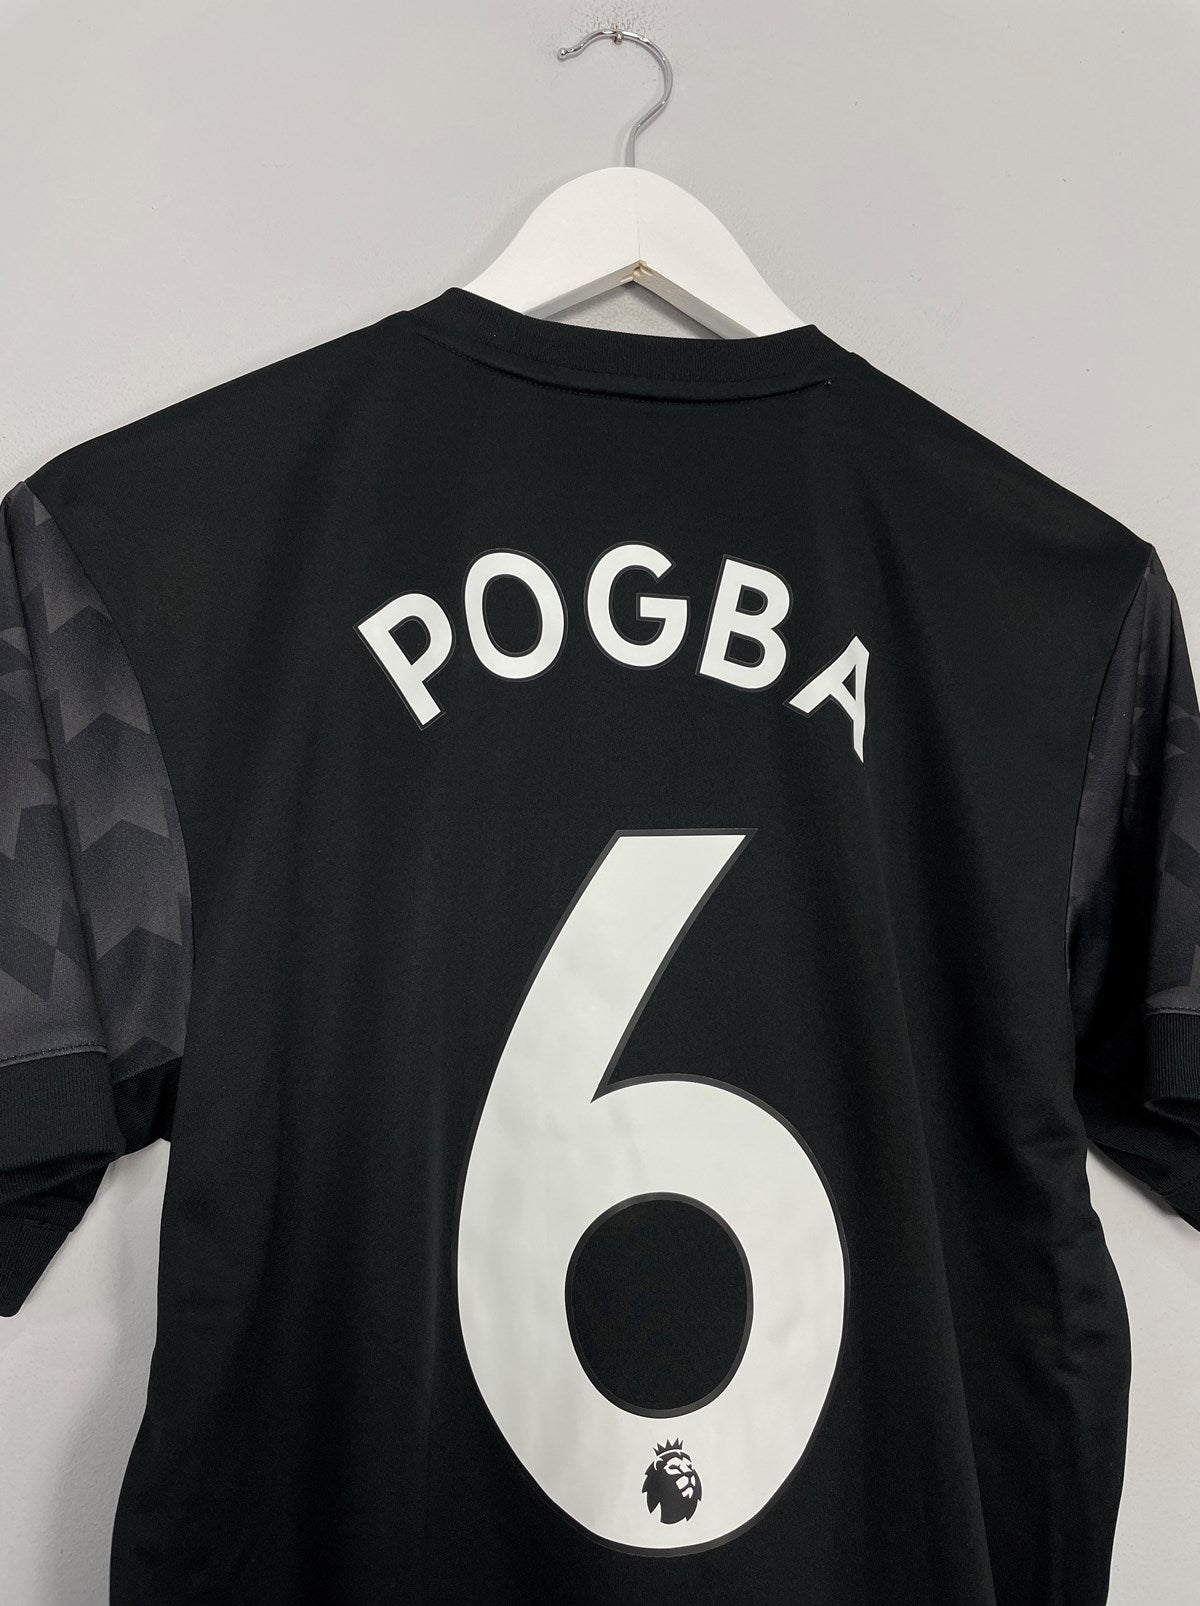 pogba manchester united jersey